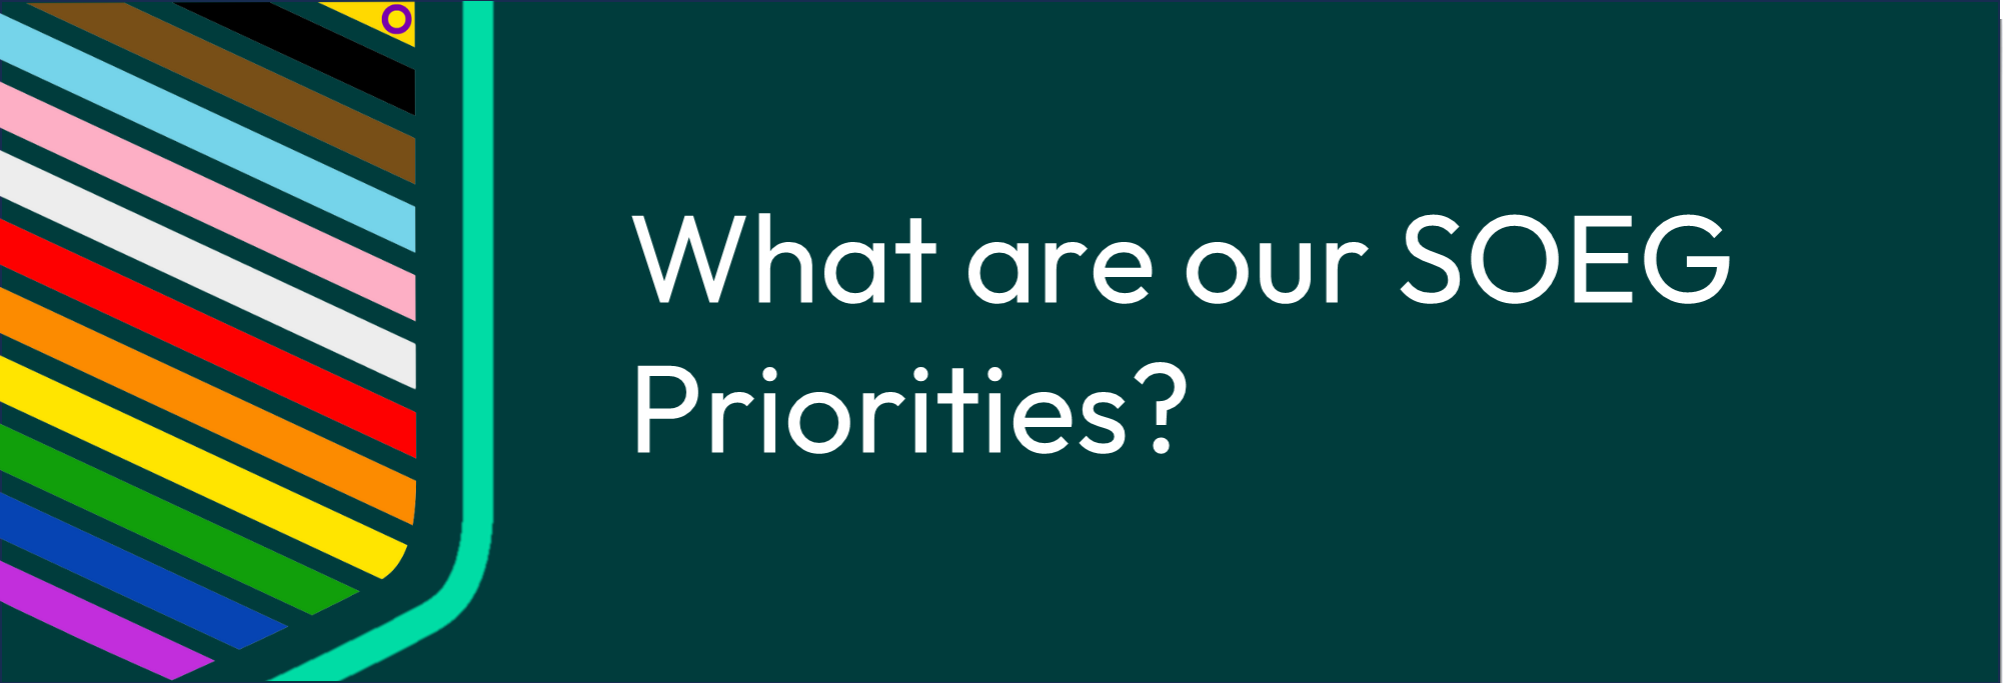 SOEG - what are our priorities banner
